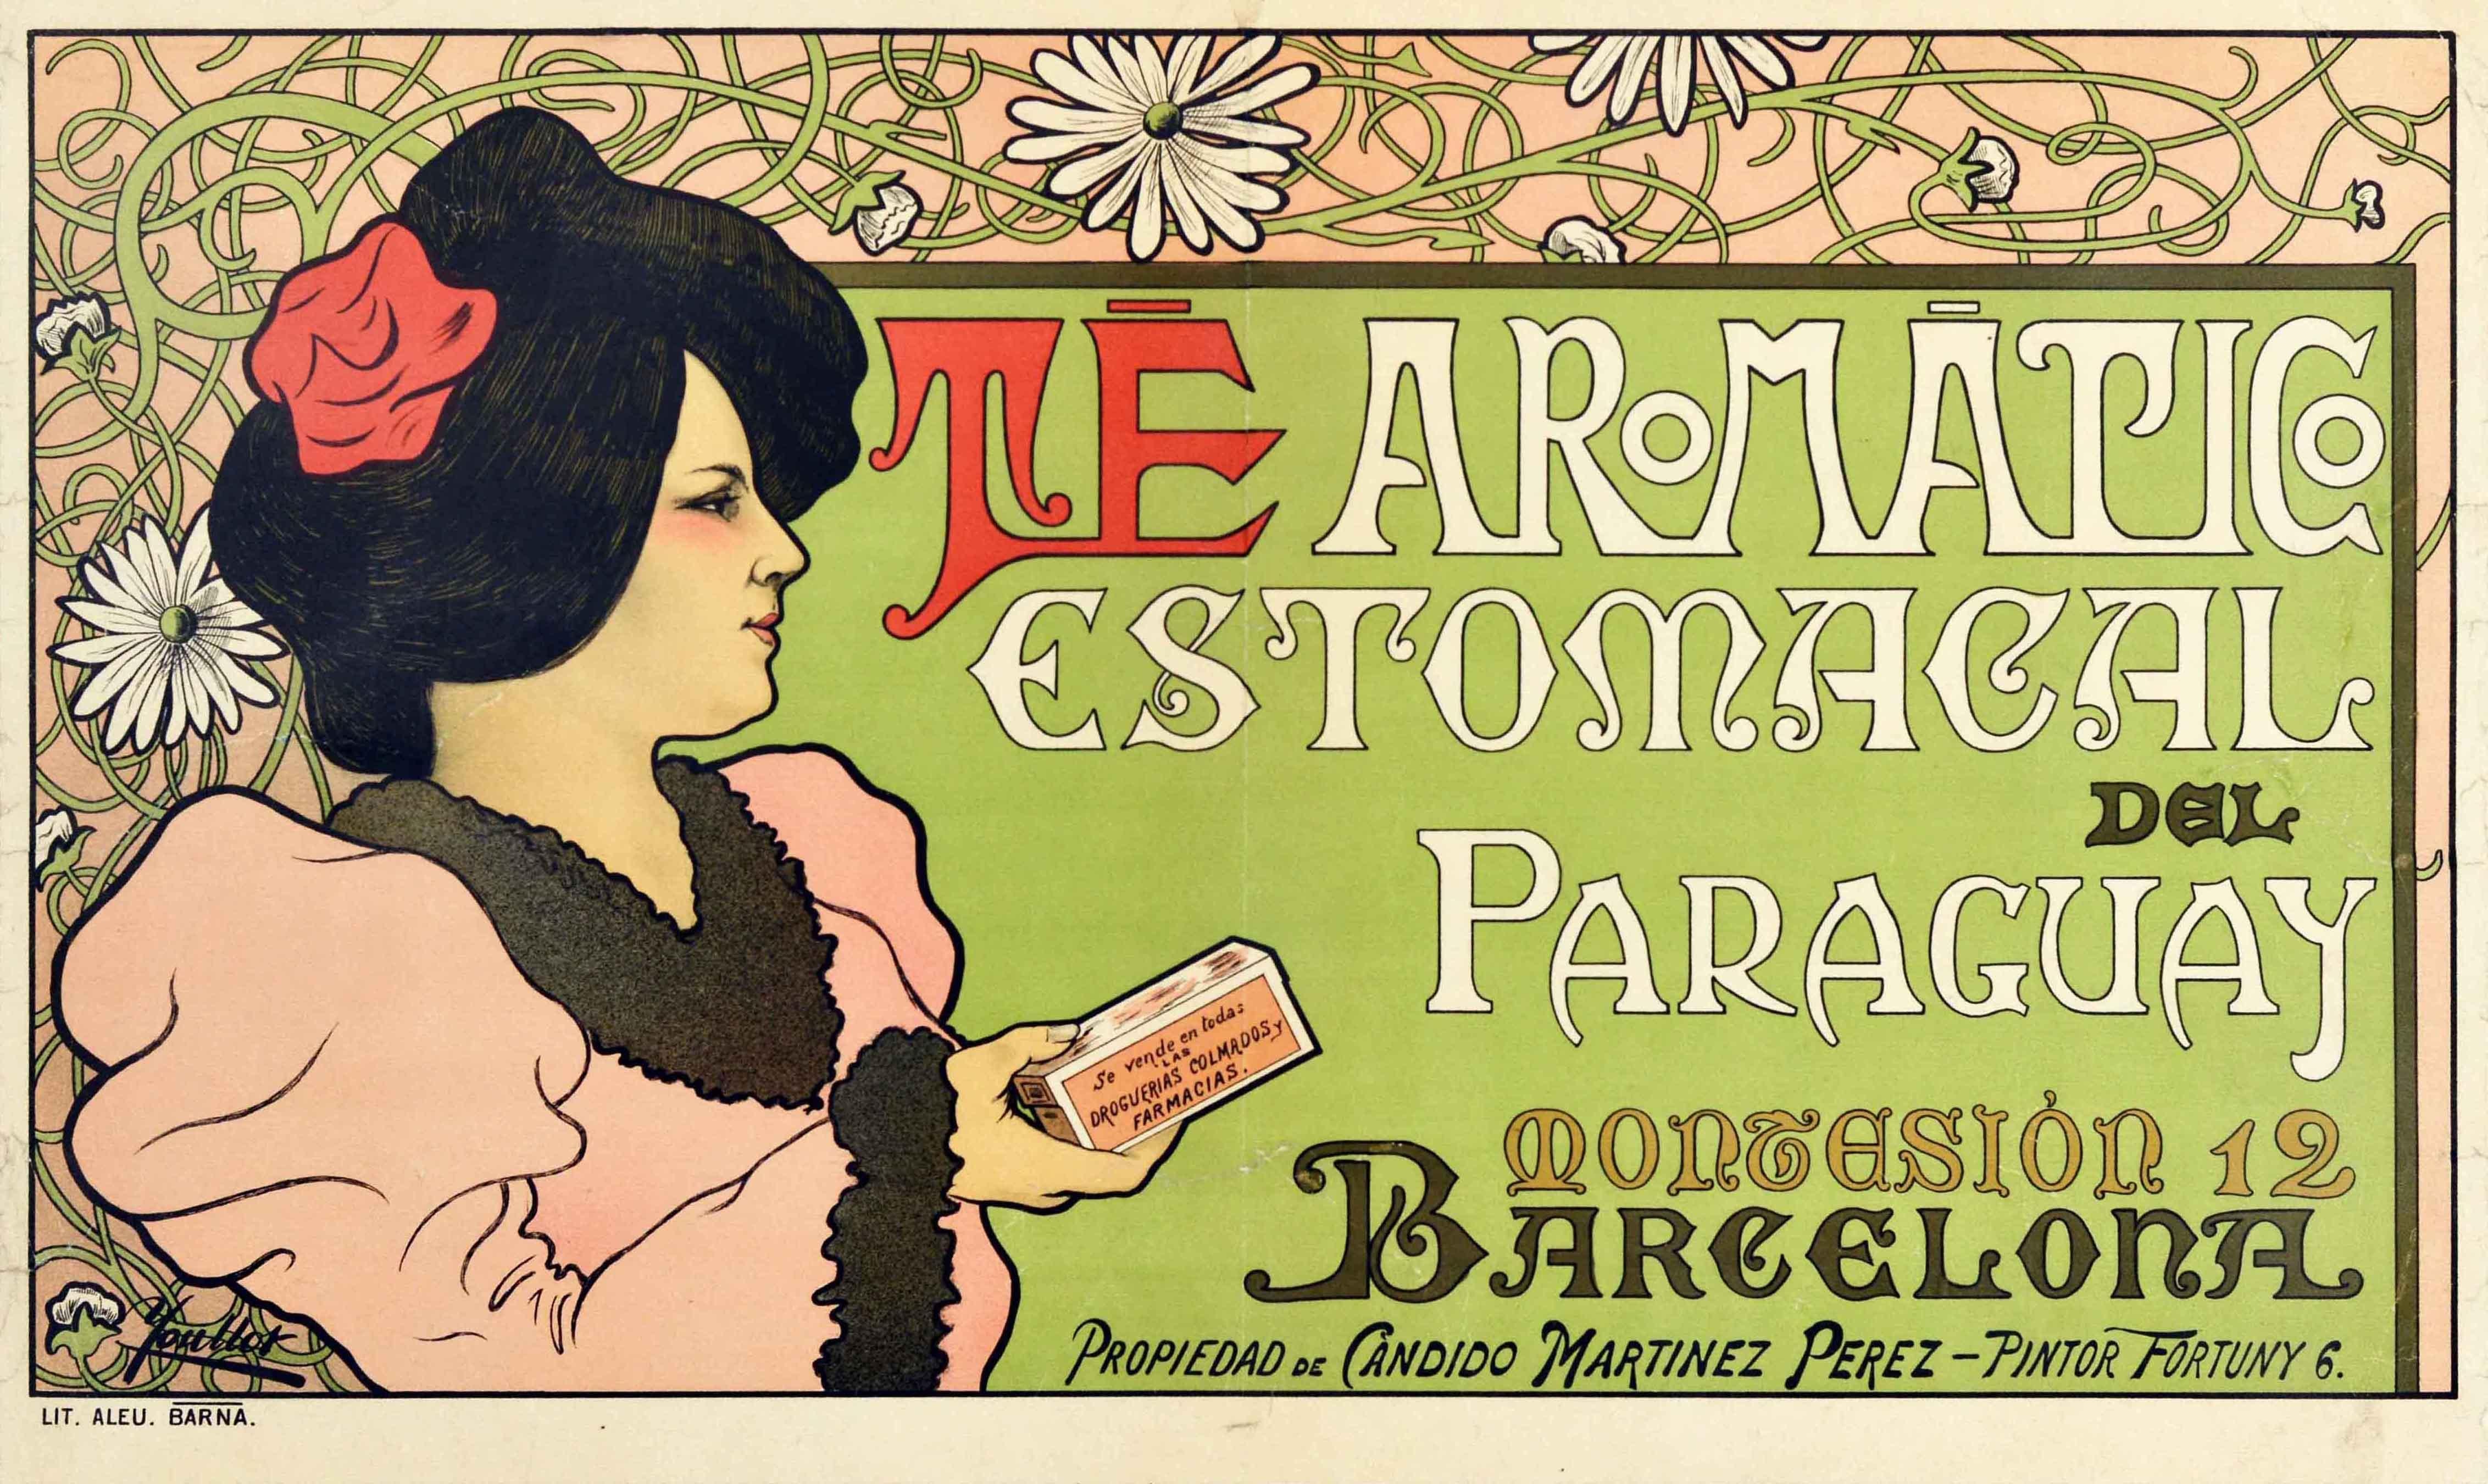 Original antique advertising poster for Aromatic Stomach Tea from Paraguay / Te Aromatico Estomacal del Paraguay featuring a stunning Art Nouveau image of a fashionably dressed lady with a red flower in her hair depicted holding a box of tea set